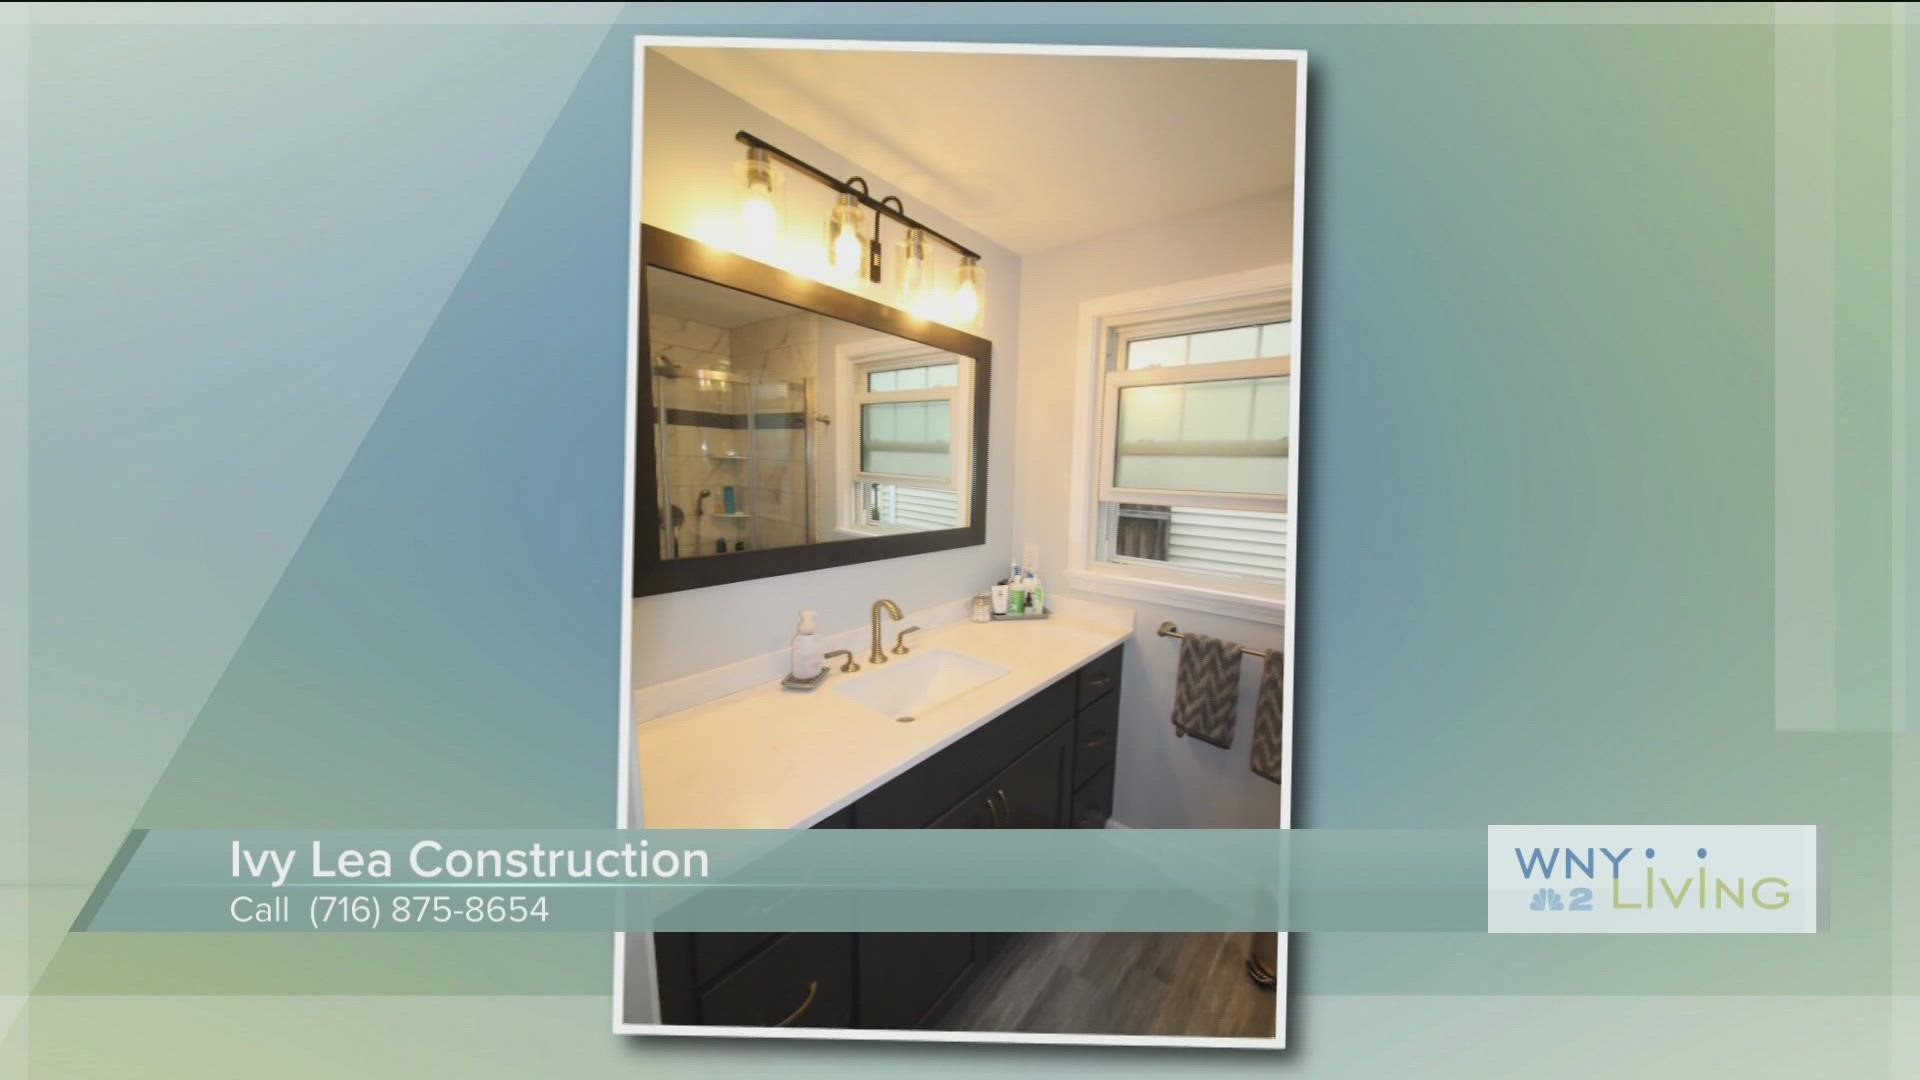 WNY Living - September 17 - Ivy Lea Construction (THIS VIDEO IS SPONSORED BY IVY LEA CONSTRUCTION)